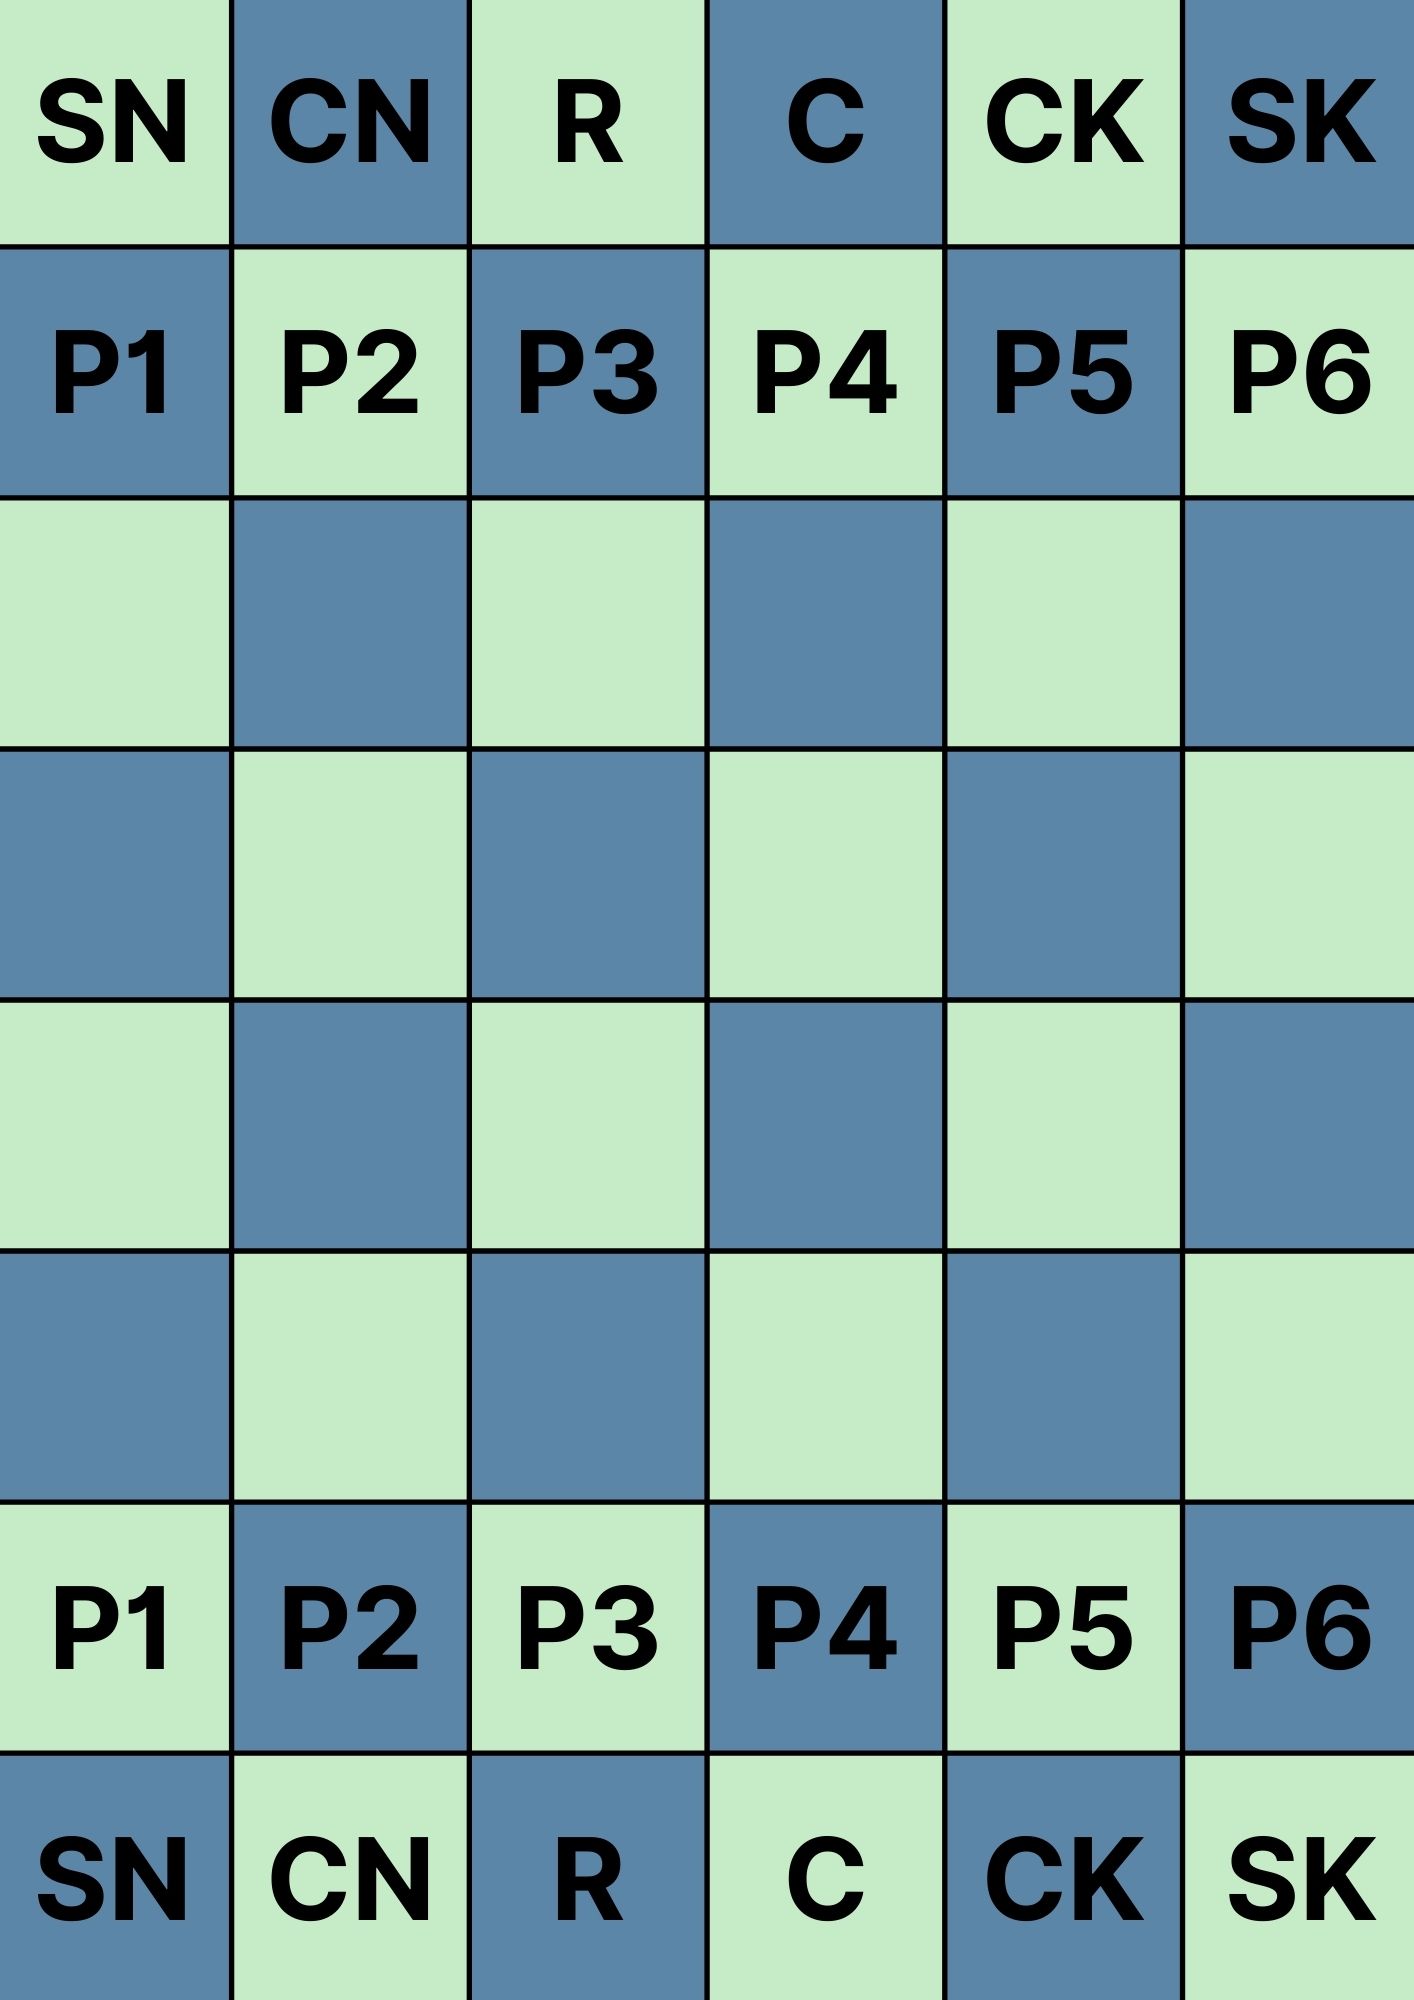 A six-by-eight blue and green checked board showing the starting position for mage's chess pieces.